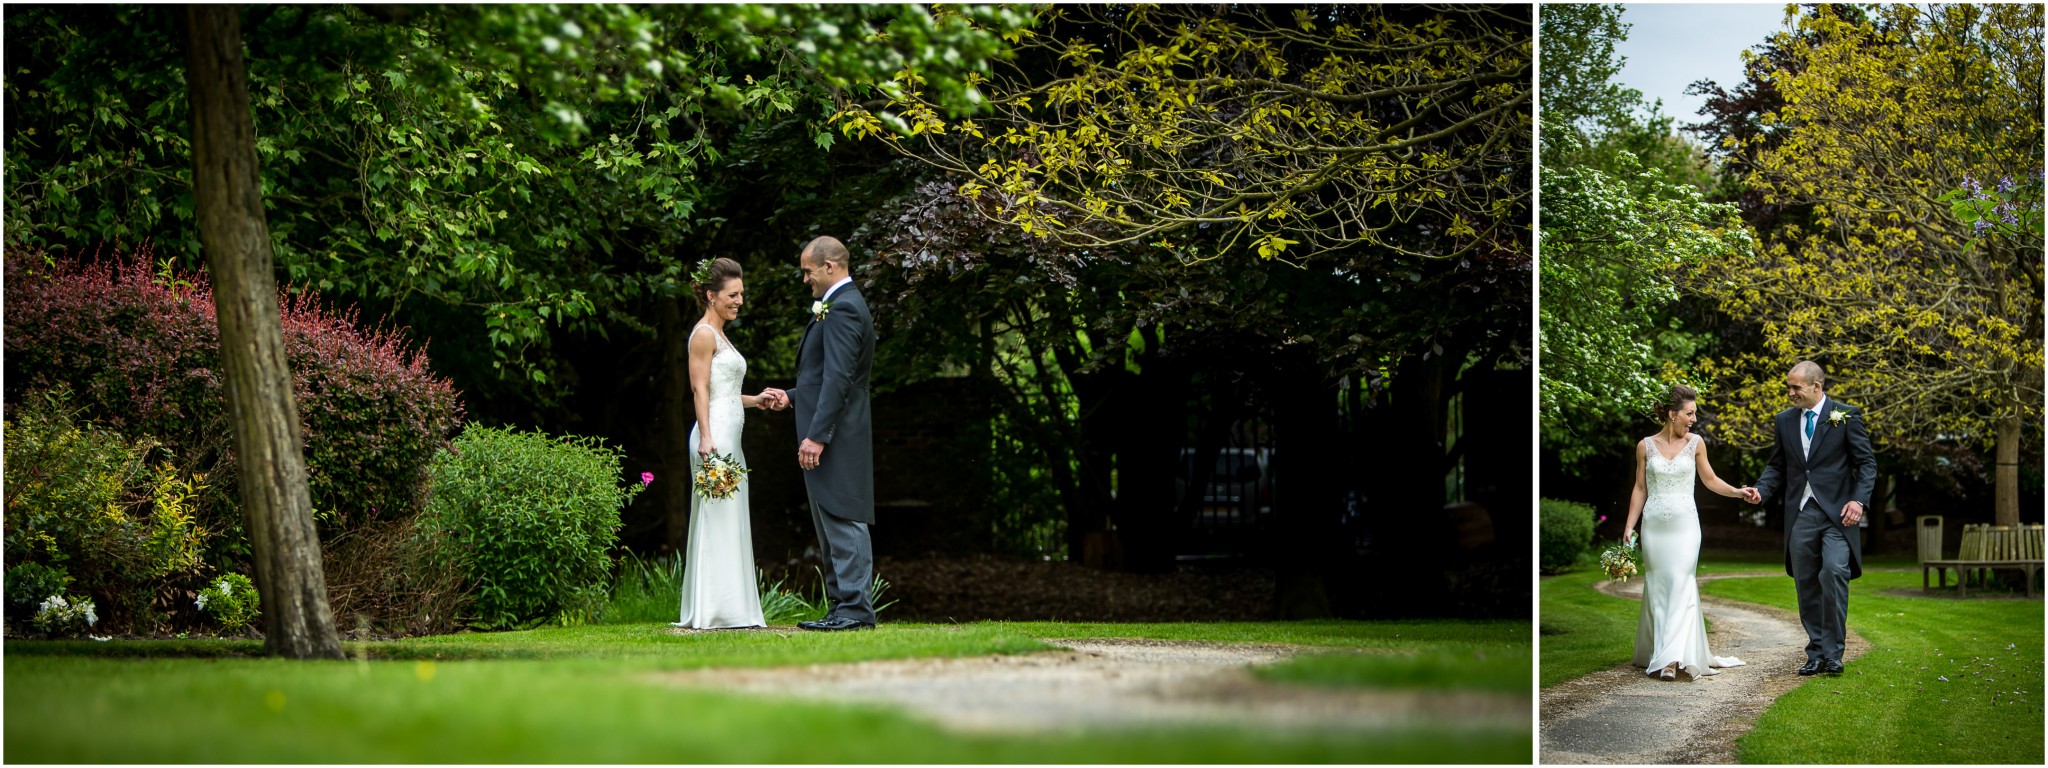 dulwich-picture-gallery-wedding-photography-052